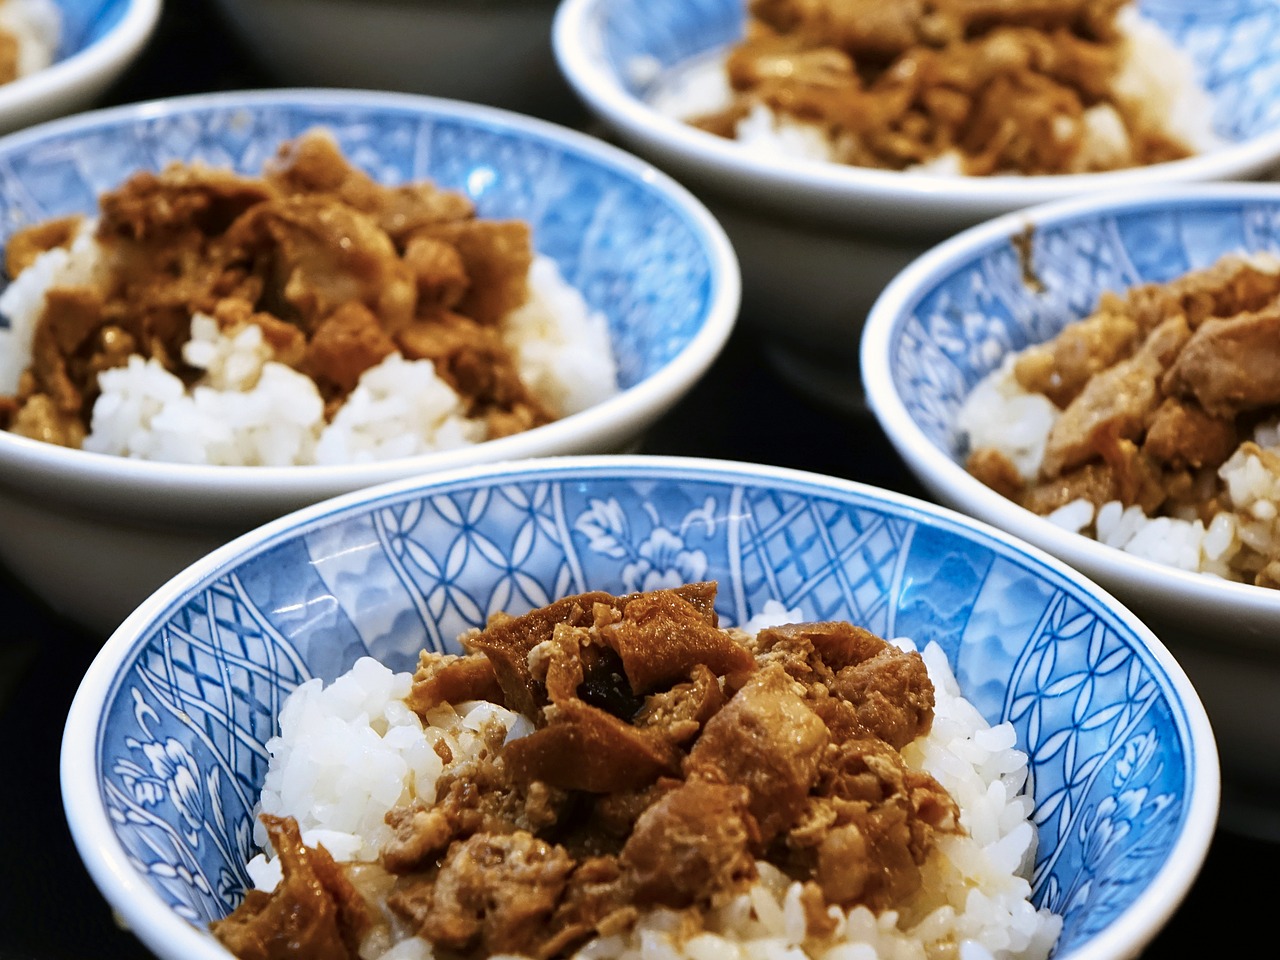 a close up of bowls of food on a table, a picture, flickr, mingei, pork, high res photo, blue, yukito kishiro